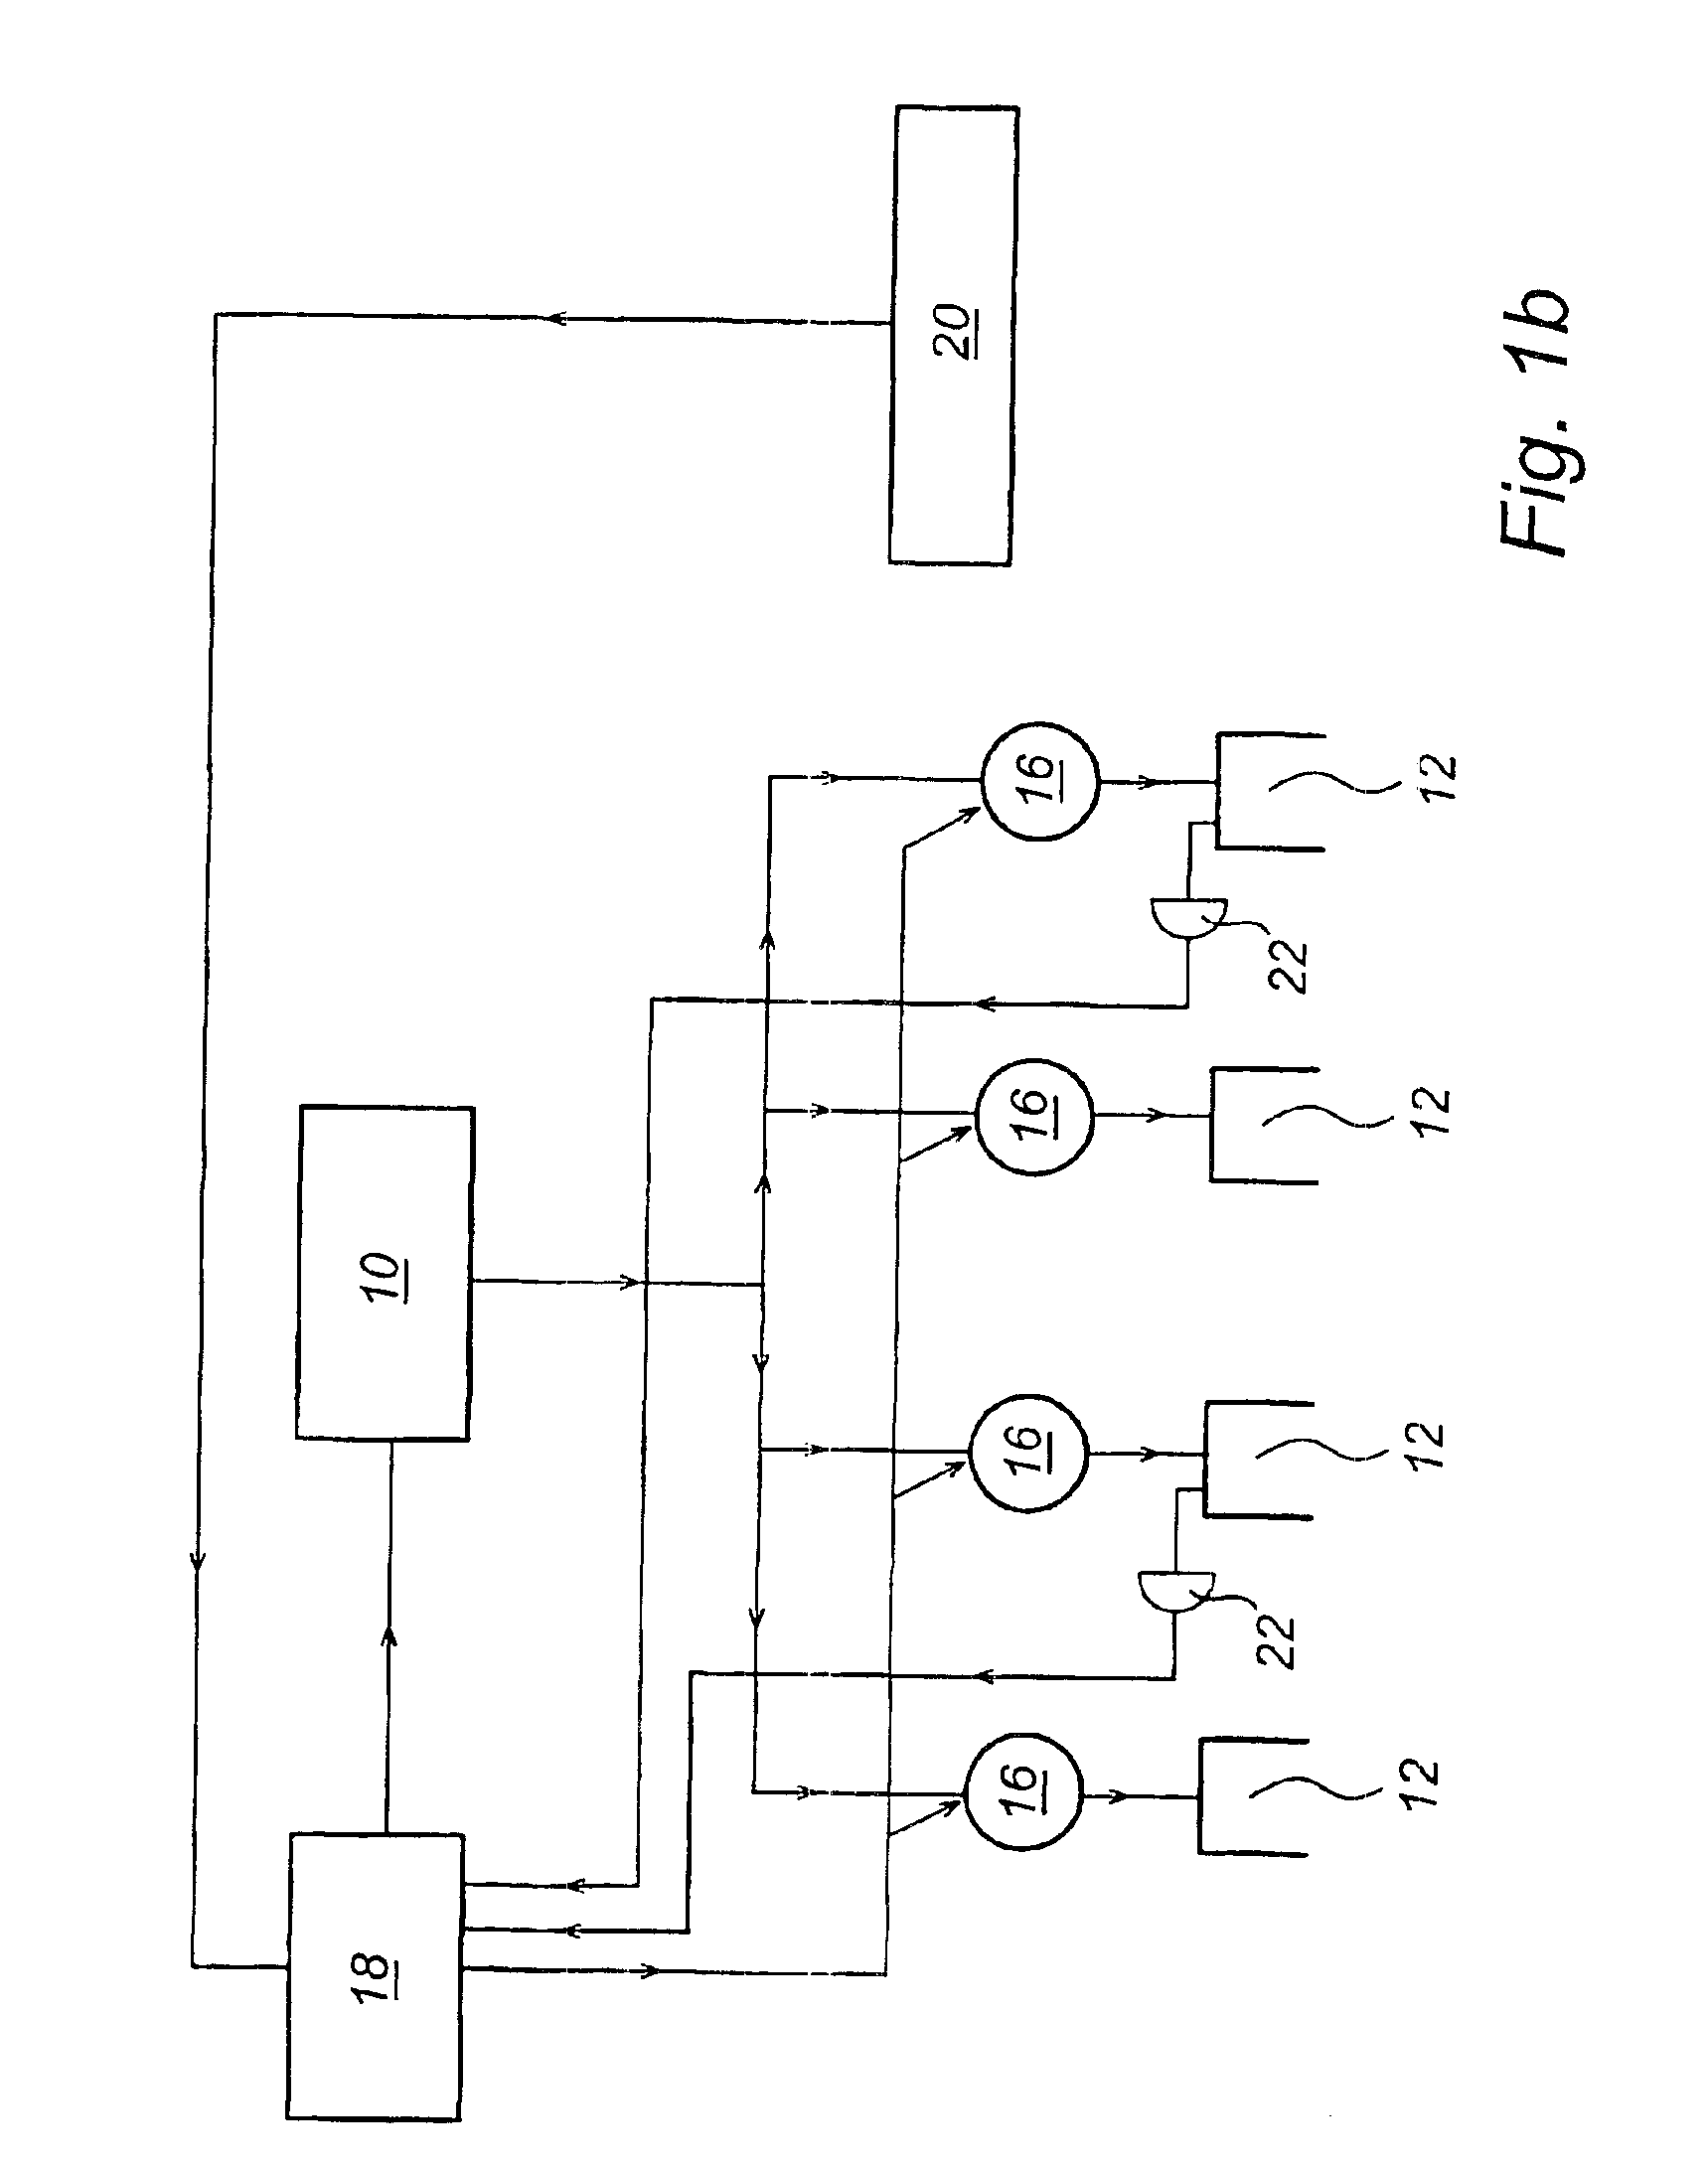 Method and apparatus for uniform heating in a microwave oven